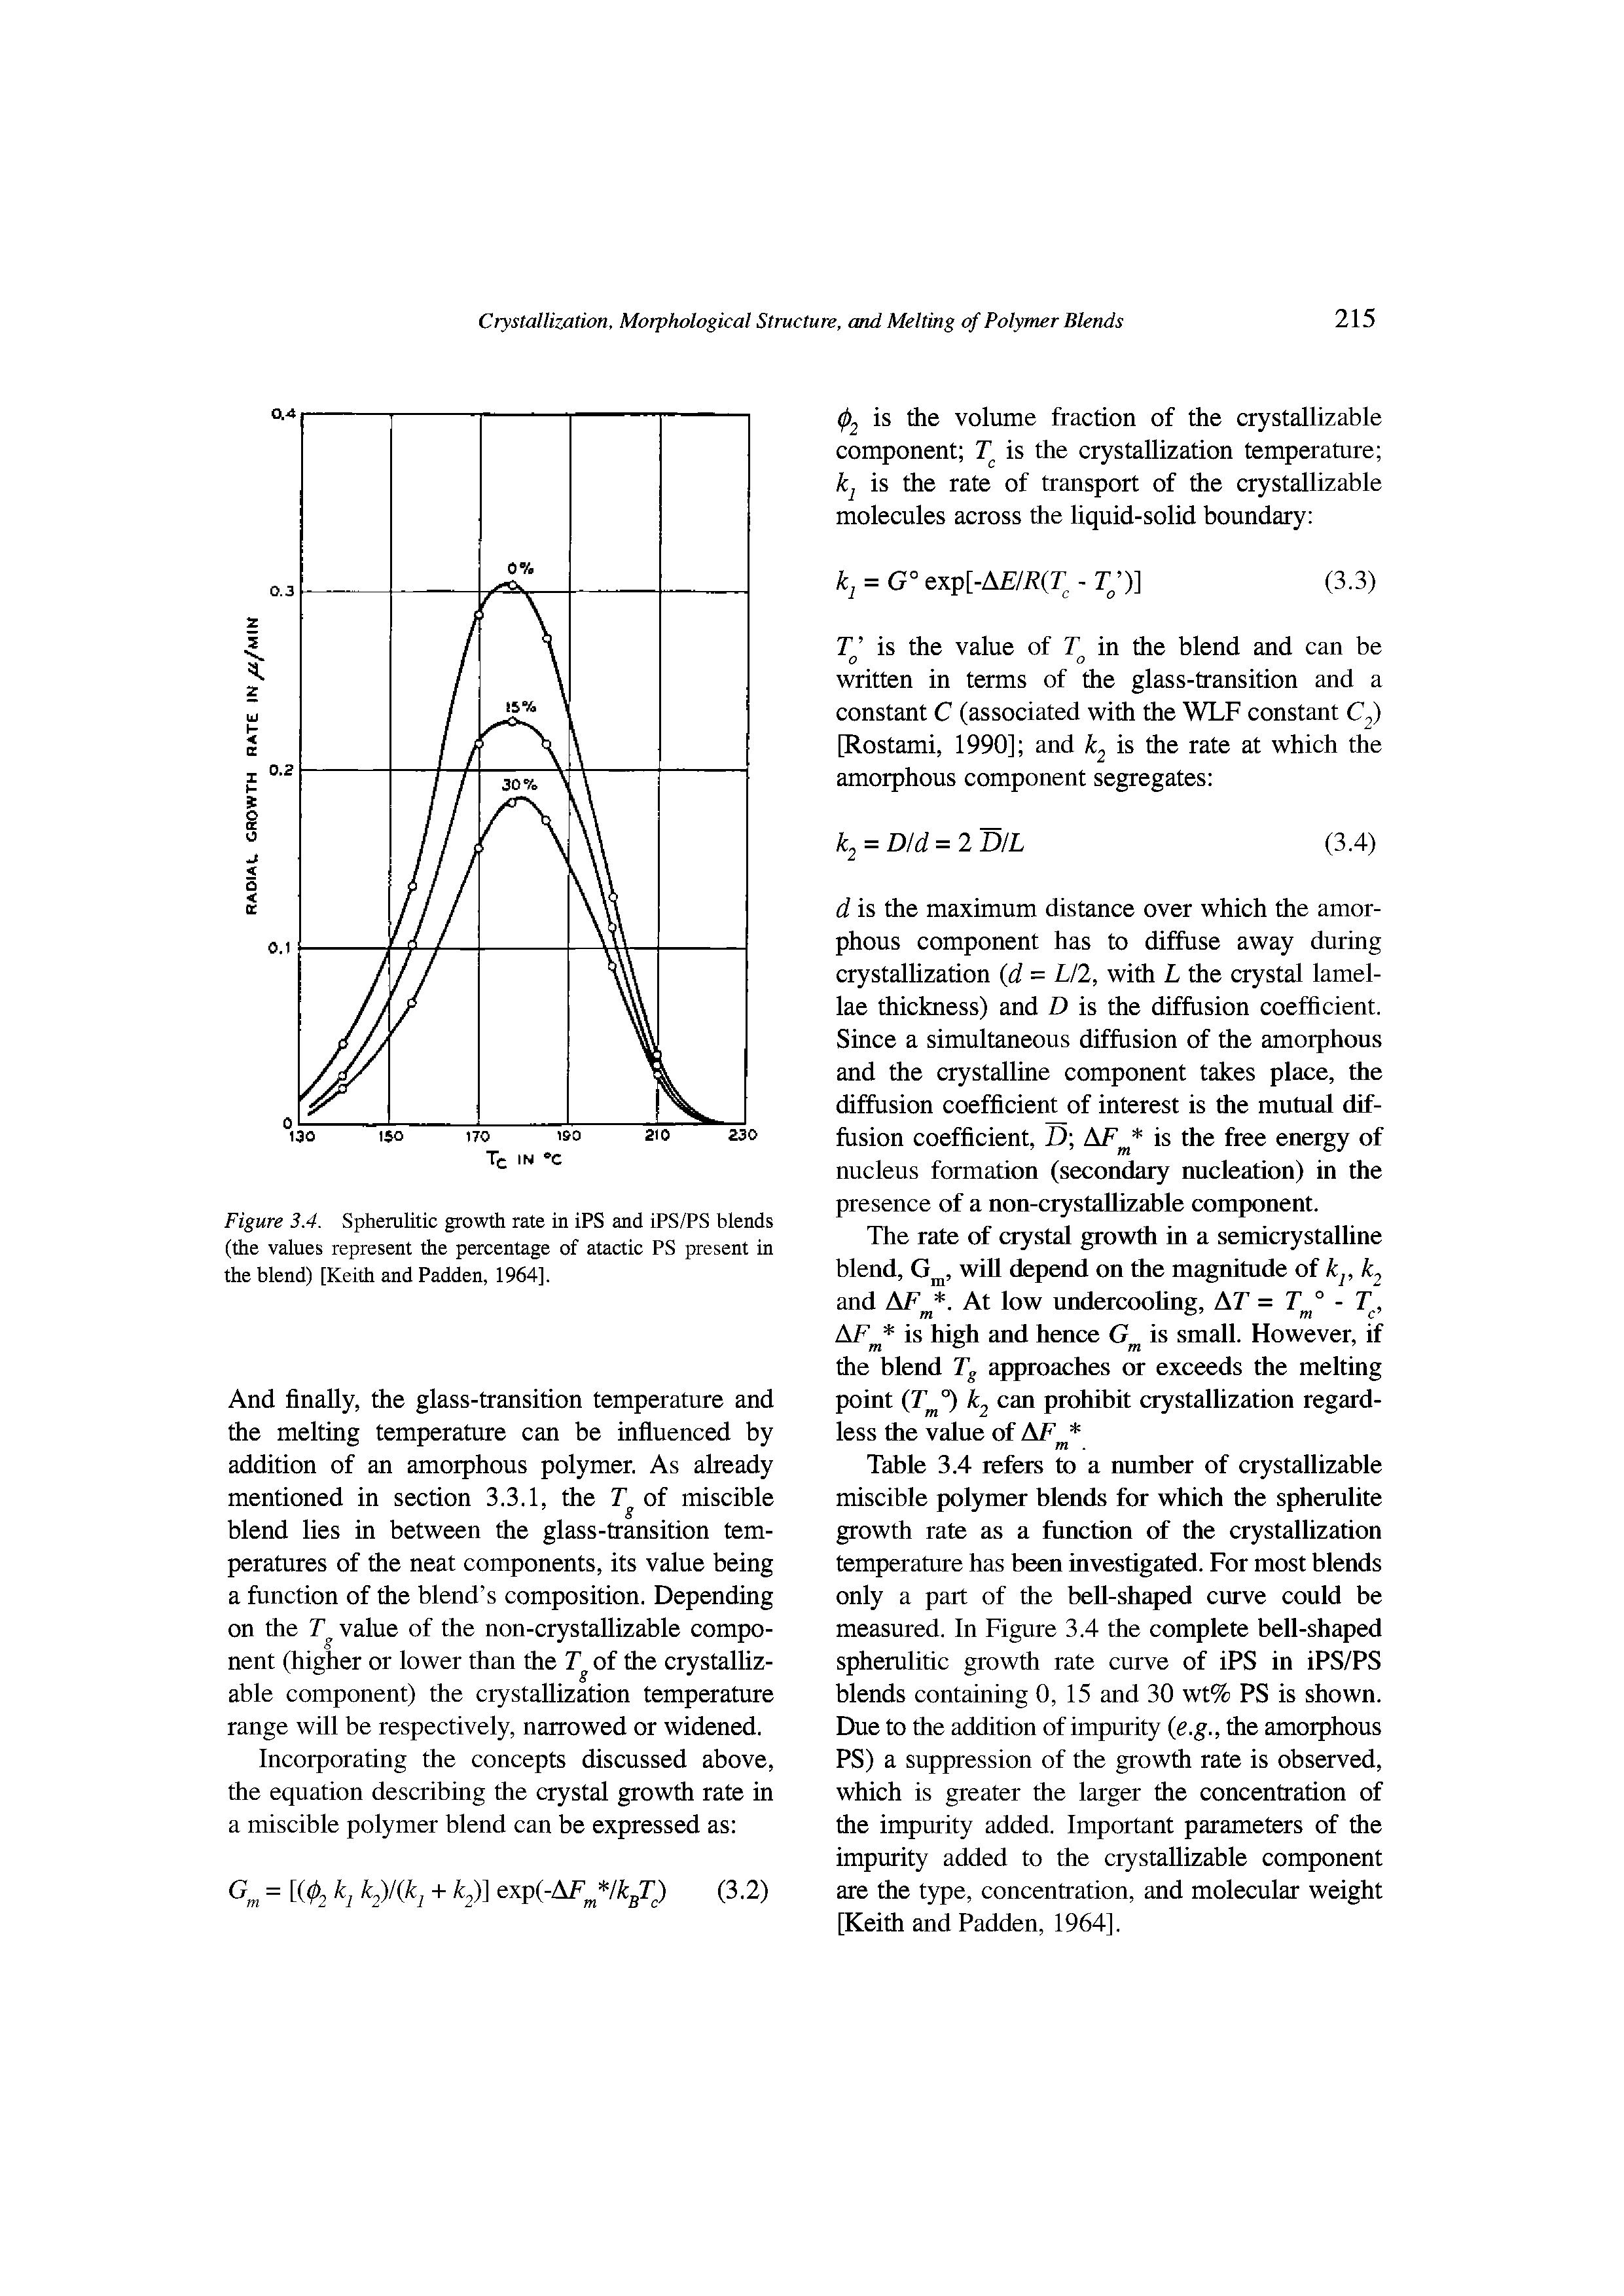 Figure 3,4. Spherulitic growth rate in iPS and iPS/PS blends (the values represent the percentage of atactic PS present in the blend) [Keith and Padden, 1964].